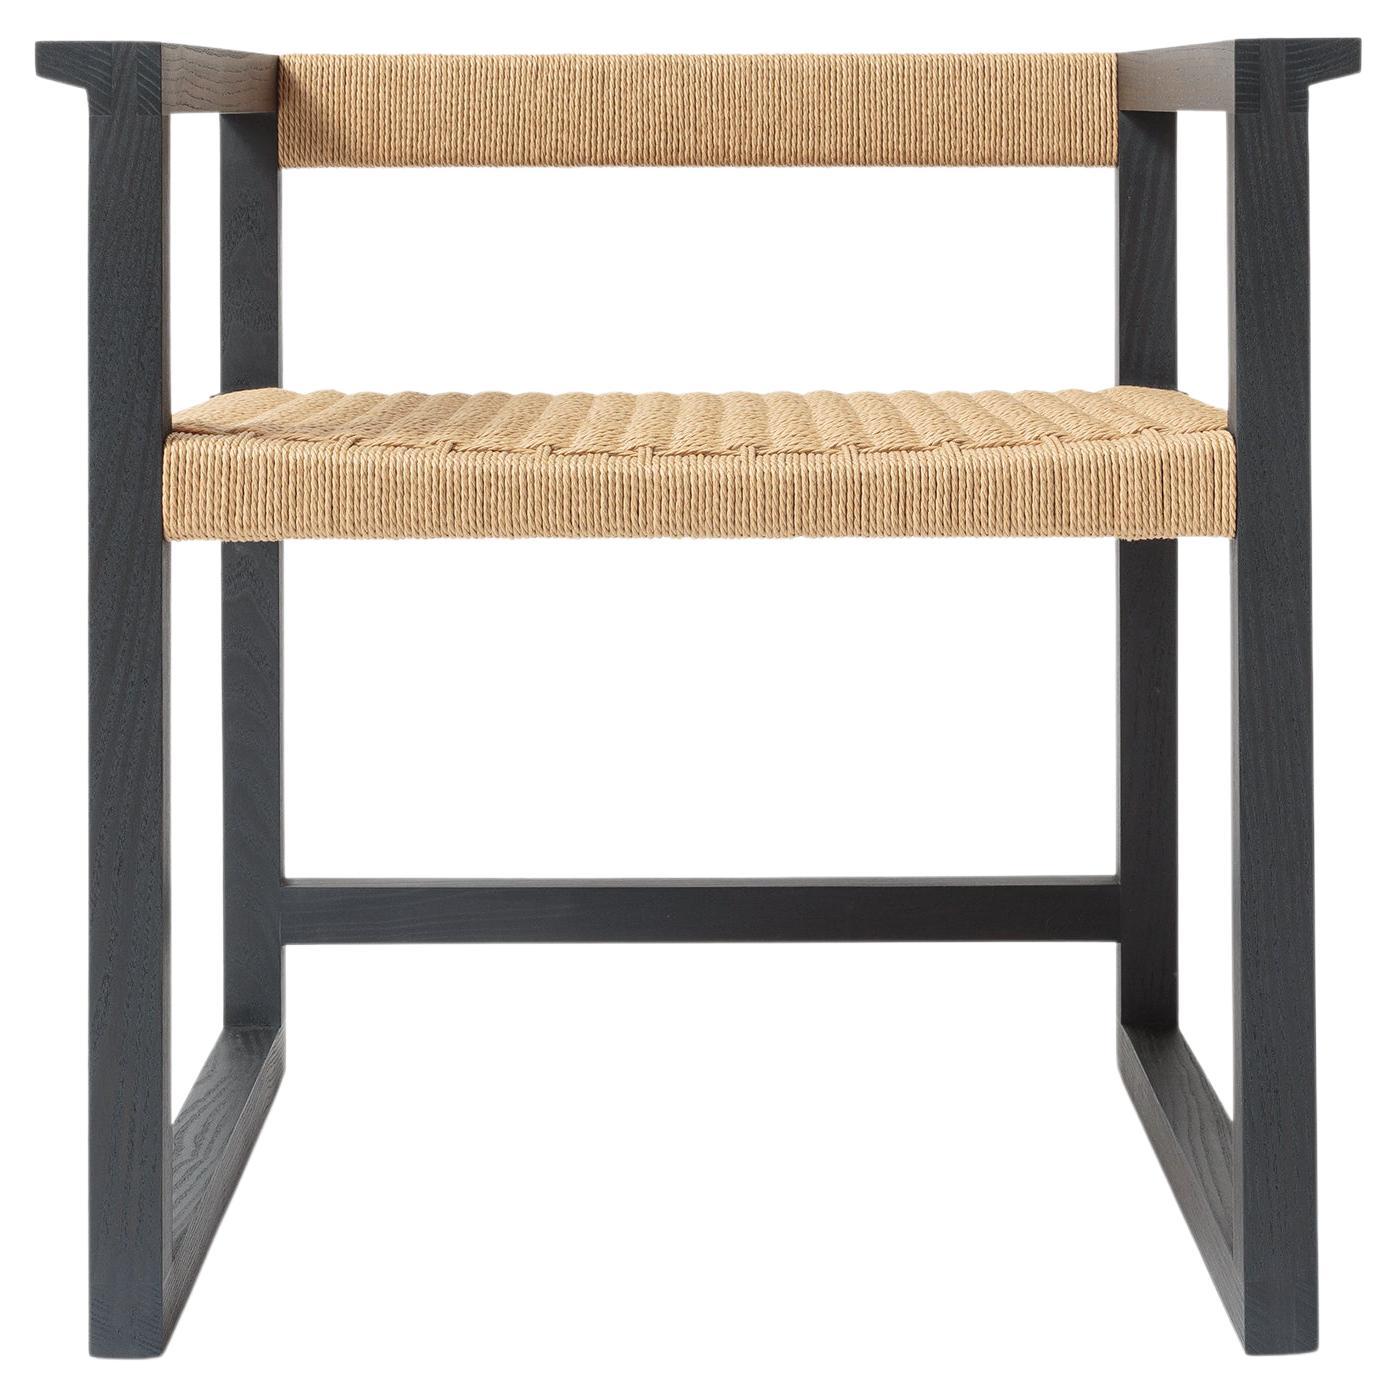 Canva Chair, Occasional Chair in Blackened Ash with Handwoven Danish Cord